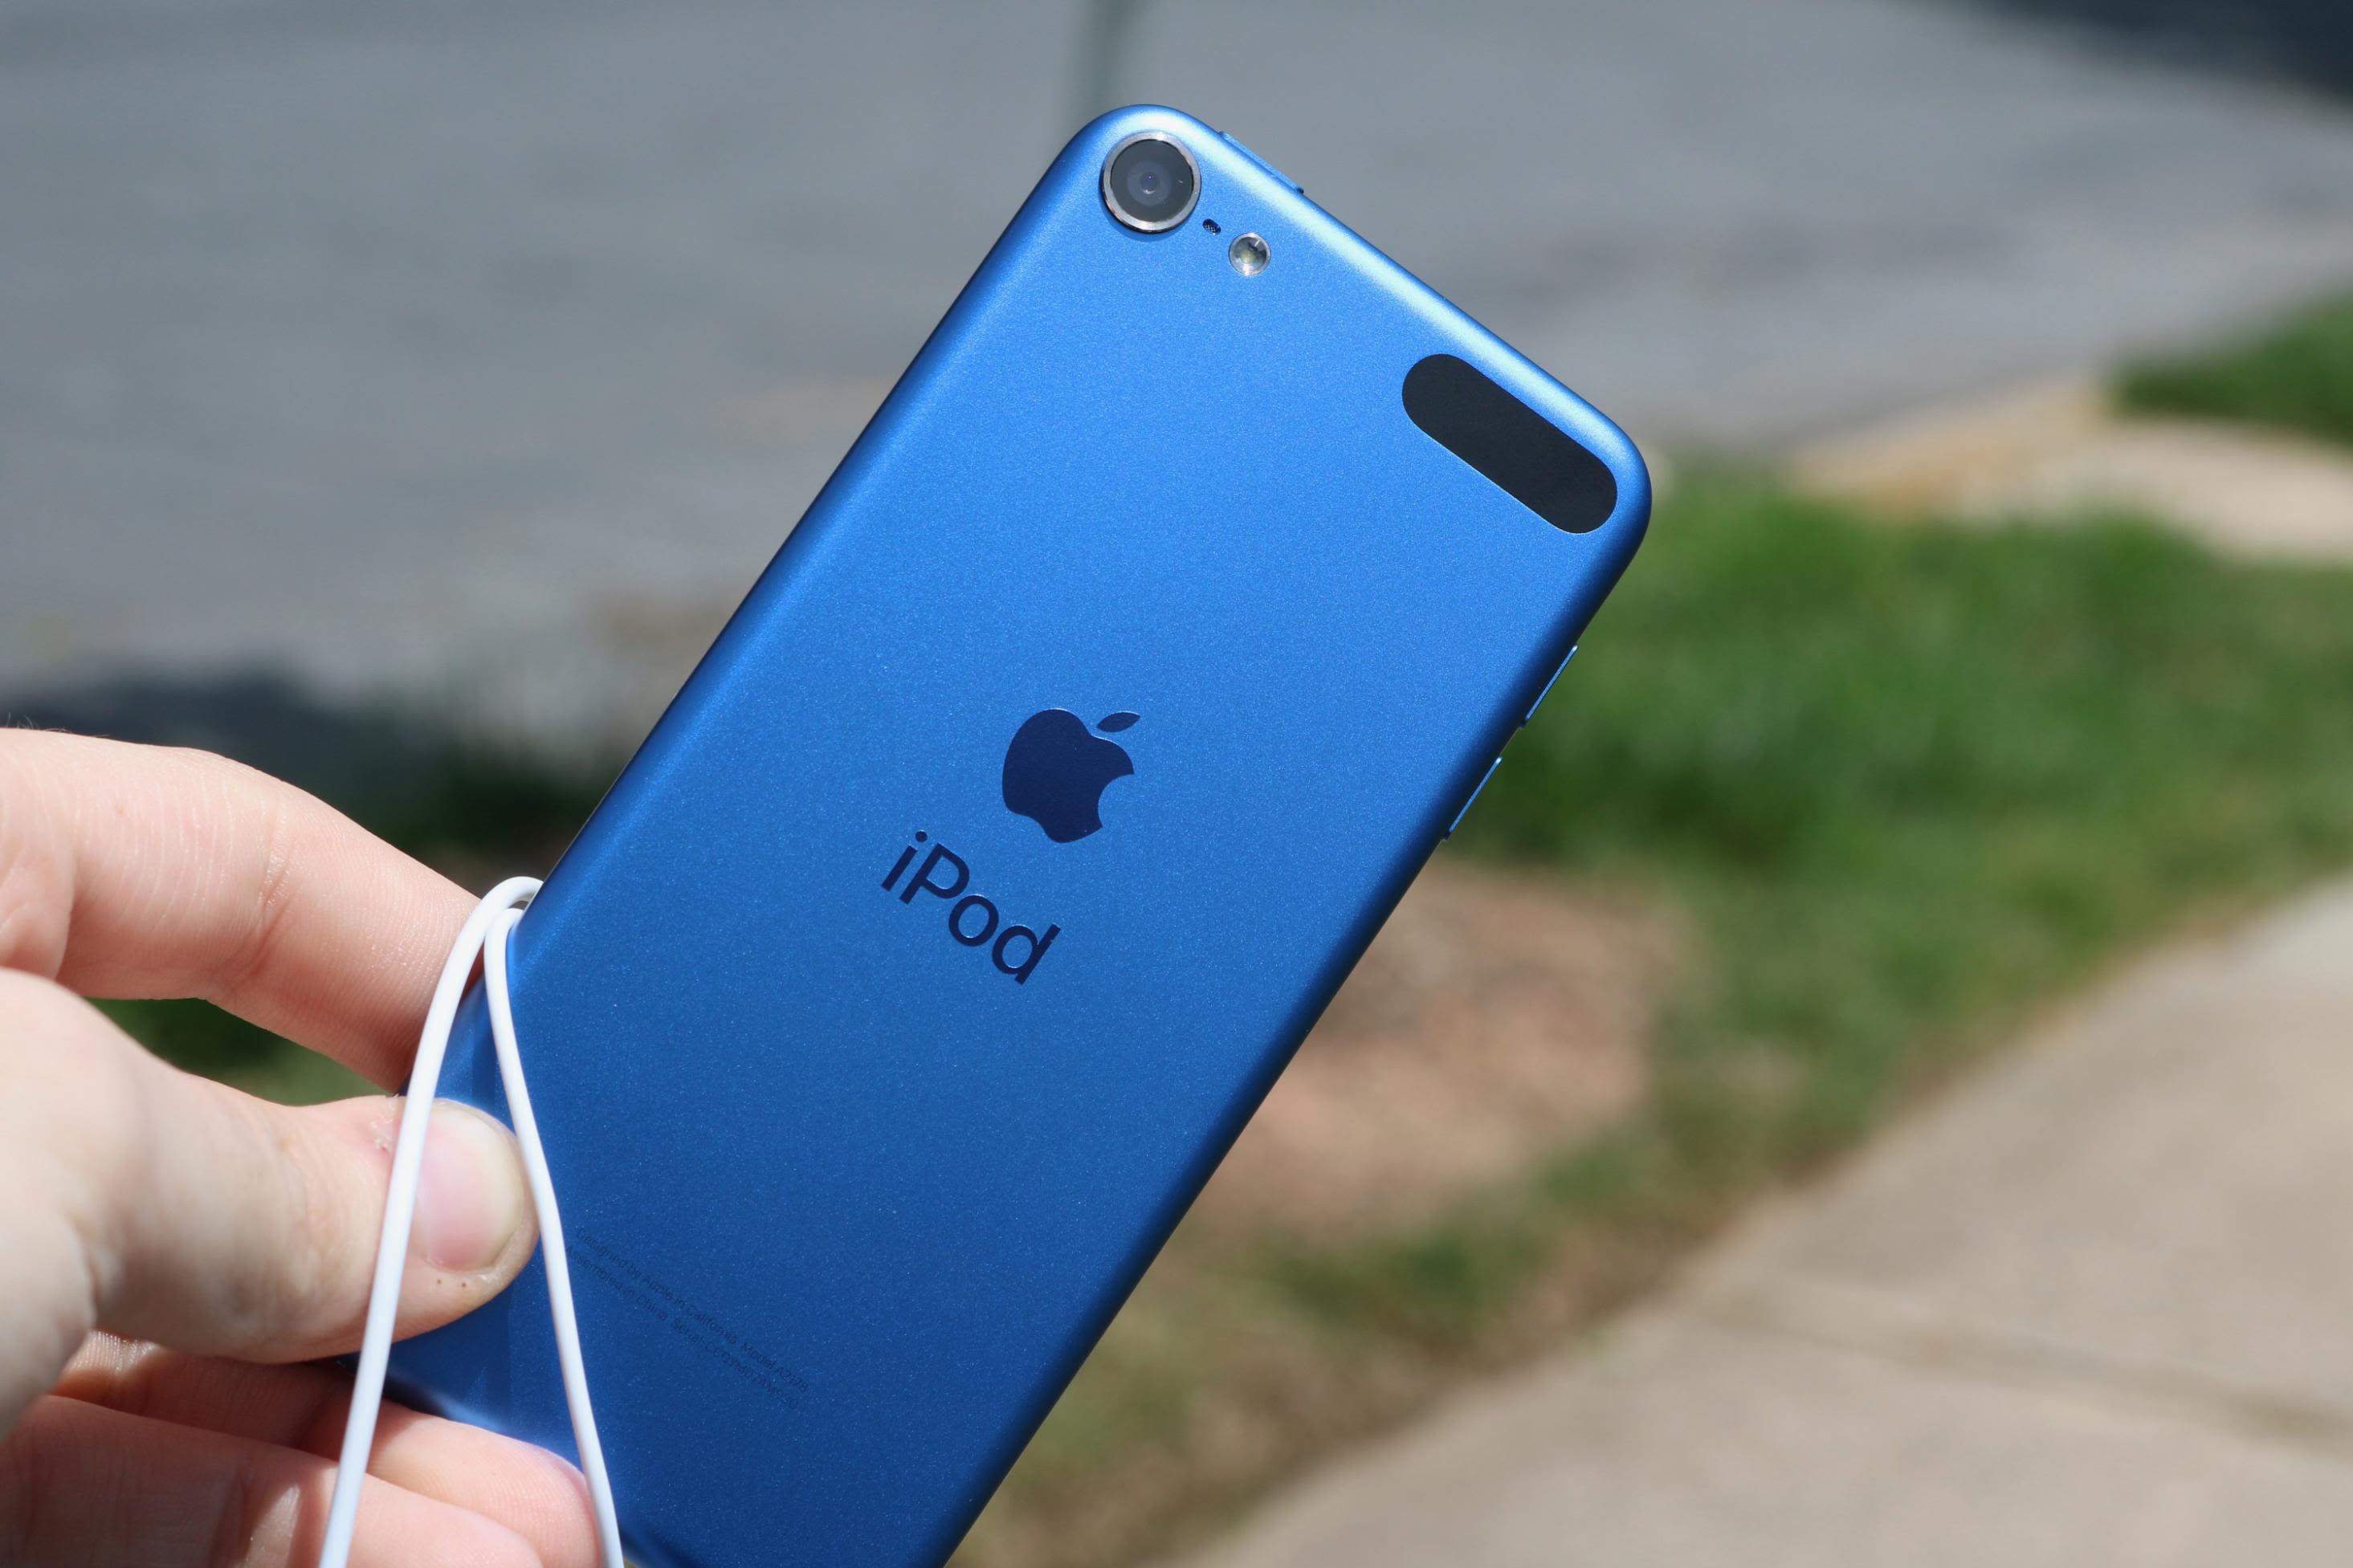 Apple iPod 7th Generation review: affordable entry point to iOS | CNN Underscored